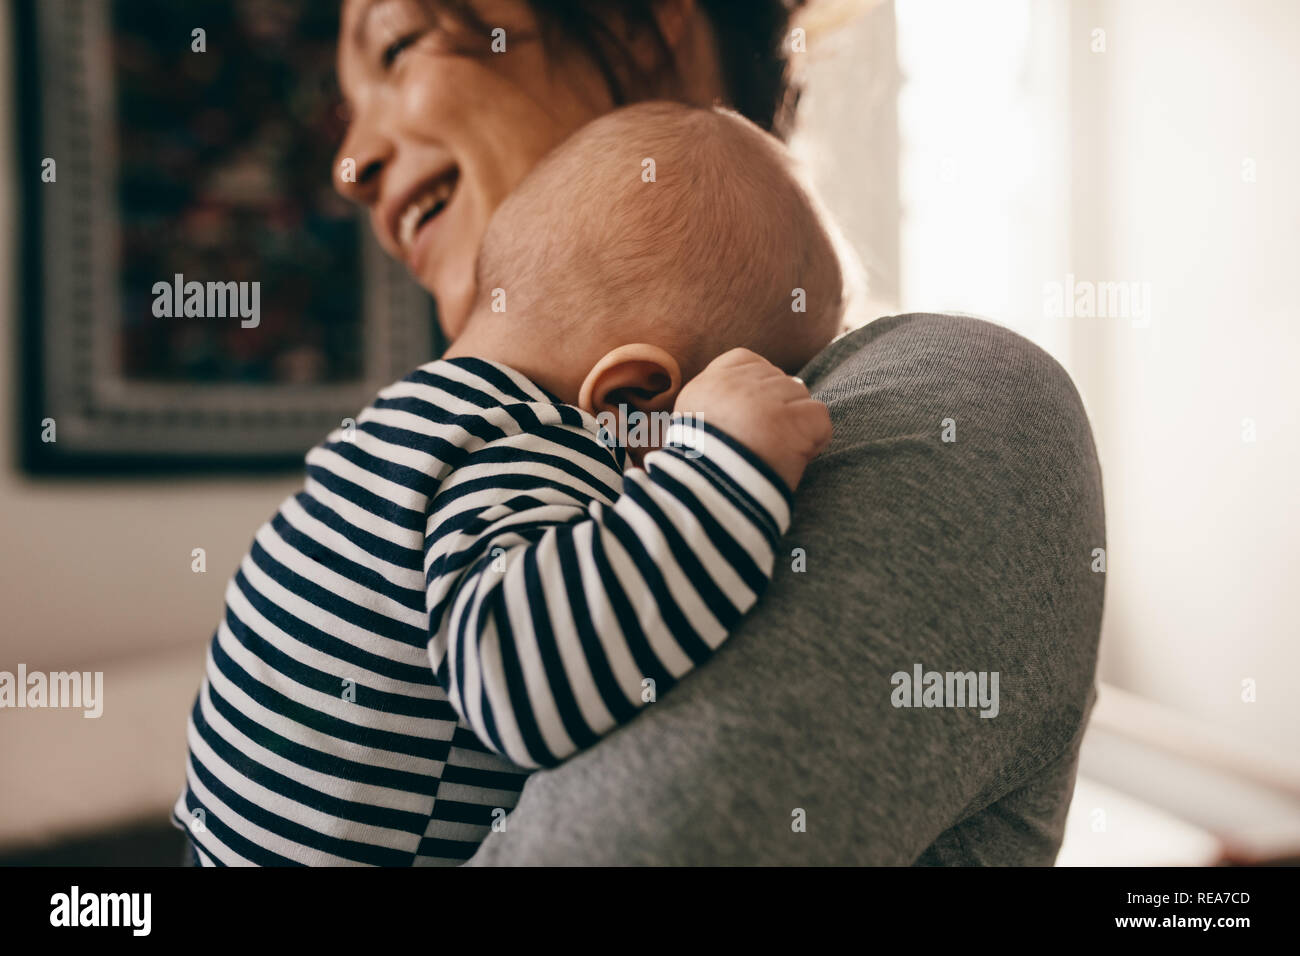 Side view of a smiling woman carrying her sleeping baby. Baby sleeping with his head resting on the shoulder of his mother at home. Stock Photo